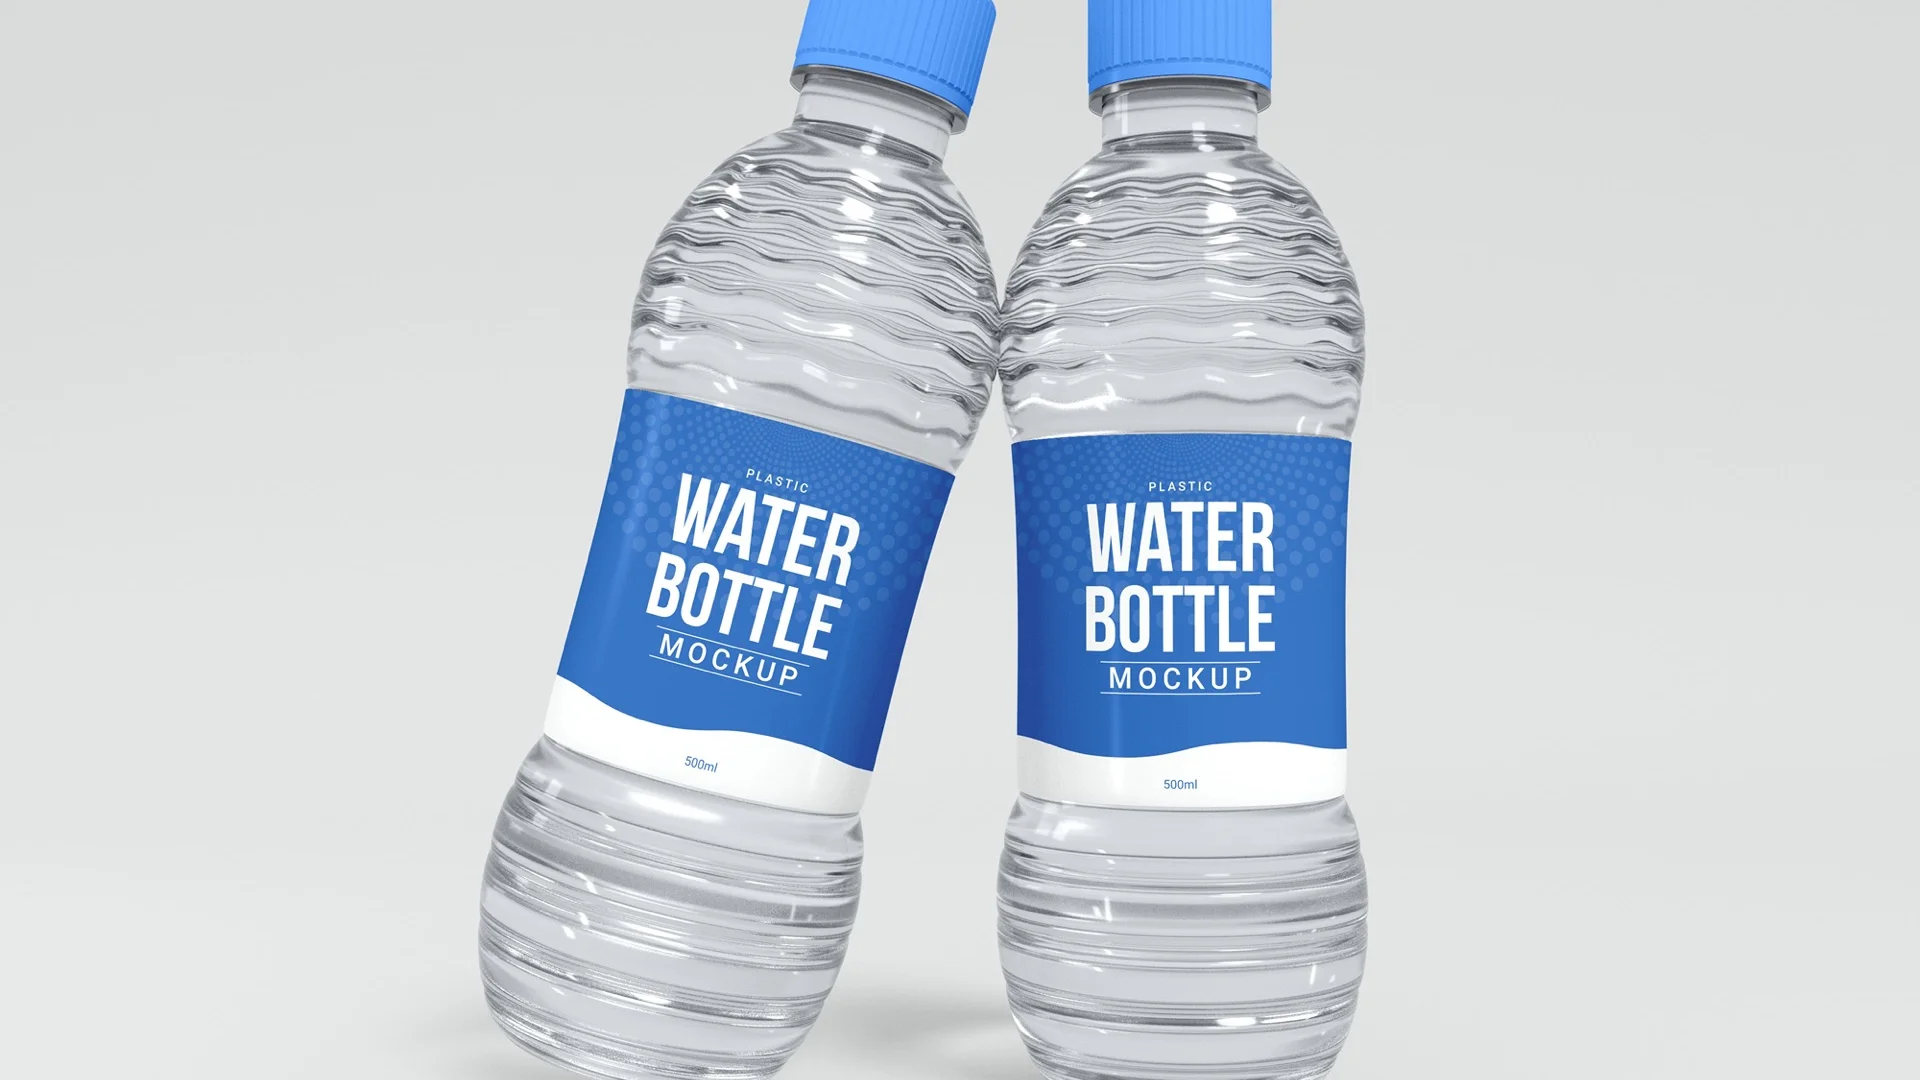 How many bottle of water is a gallon?